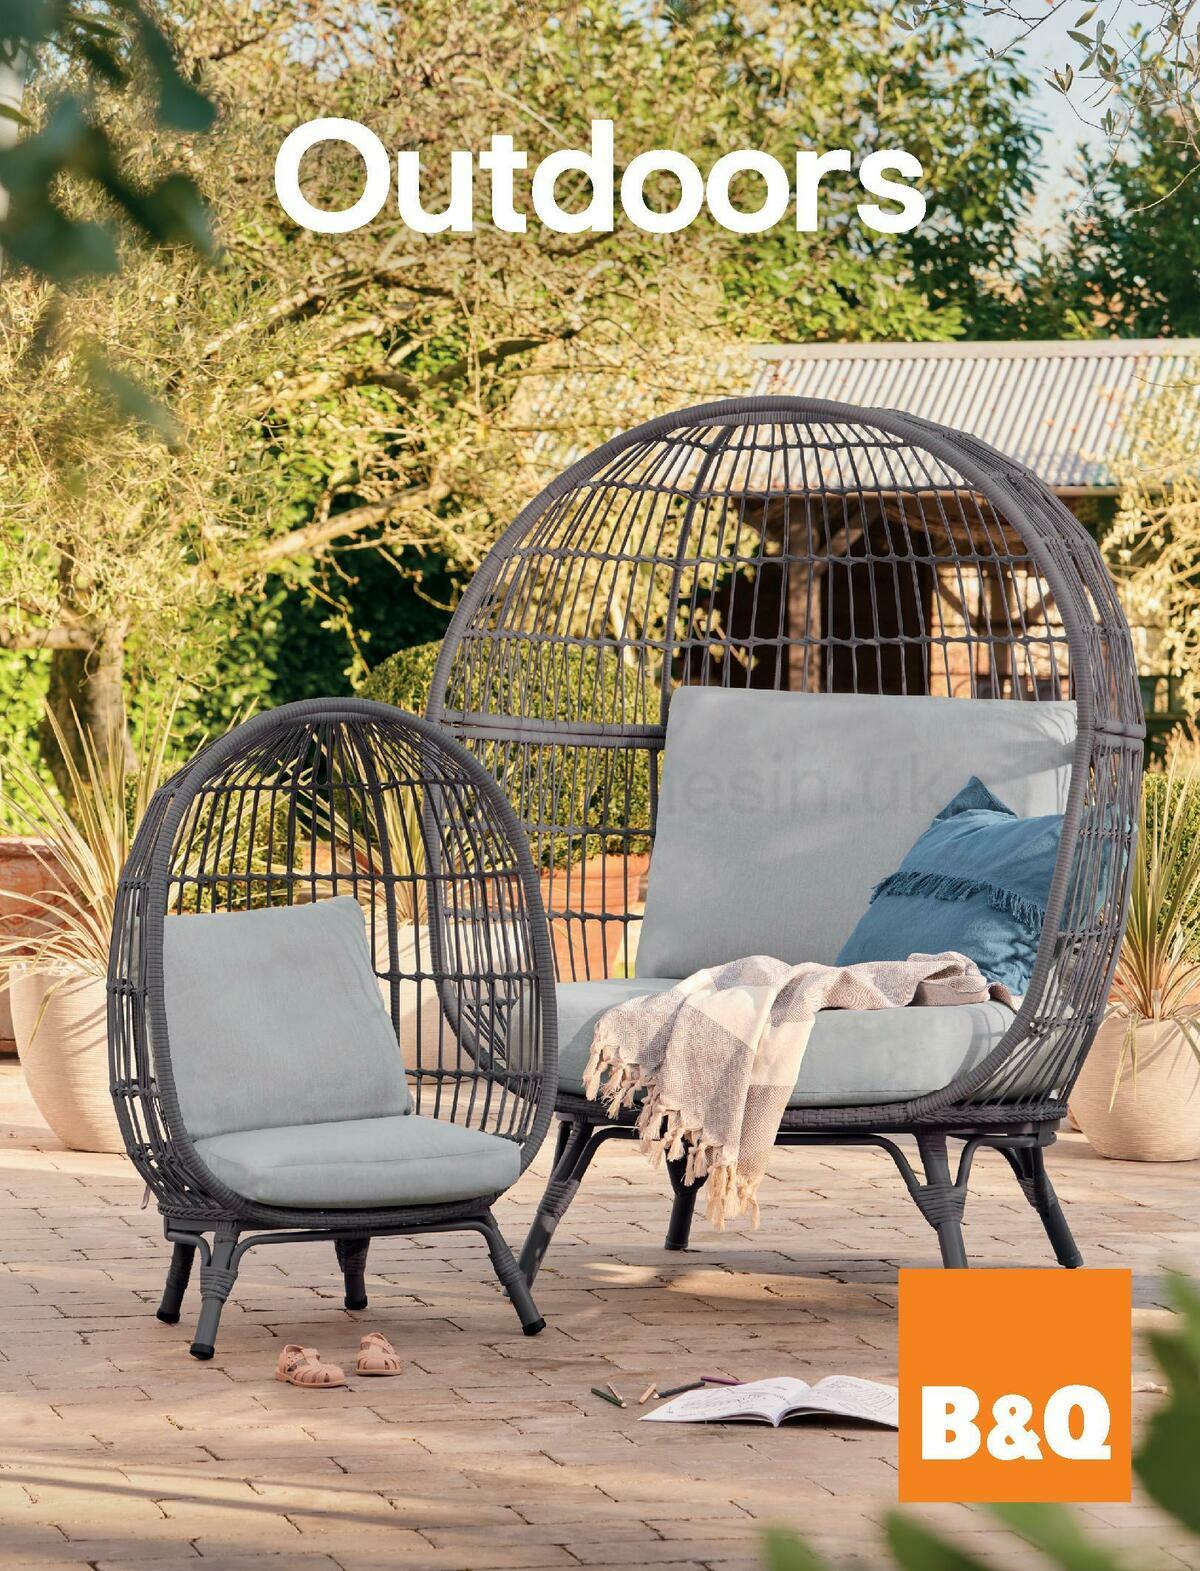 B&Q Outdoors Offers from 10 March